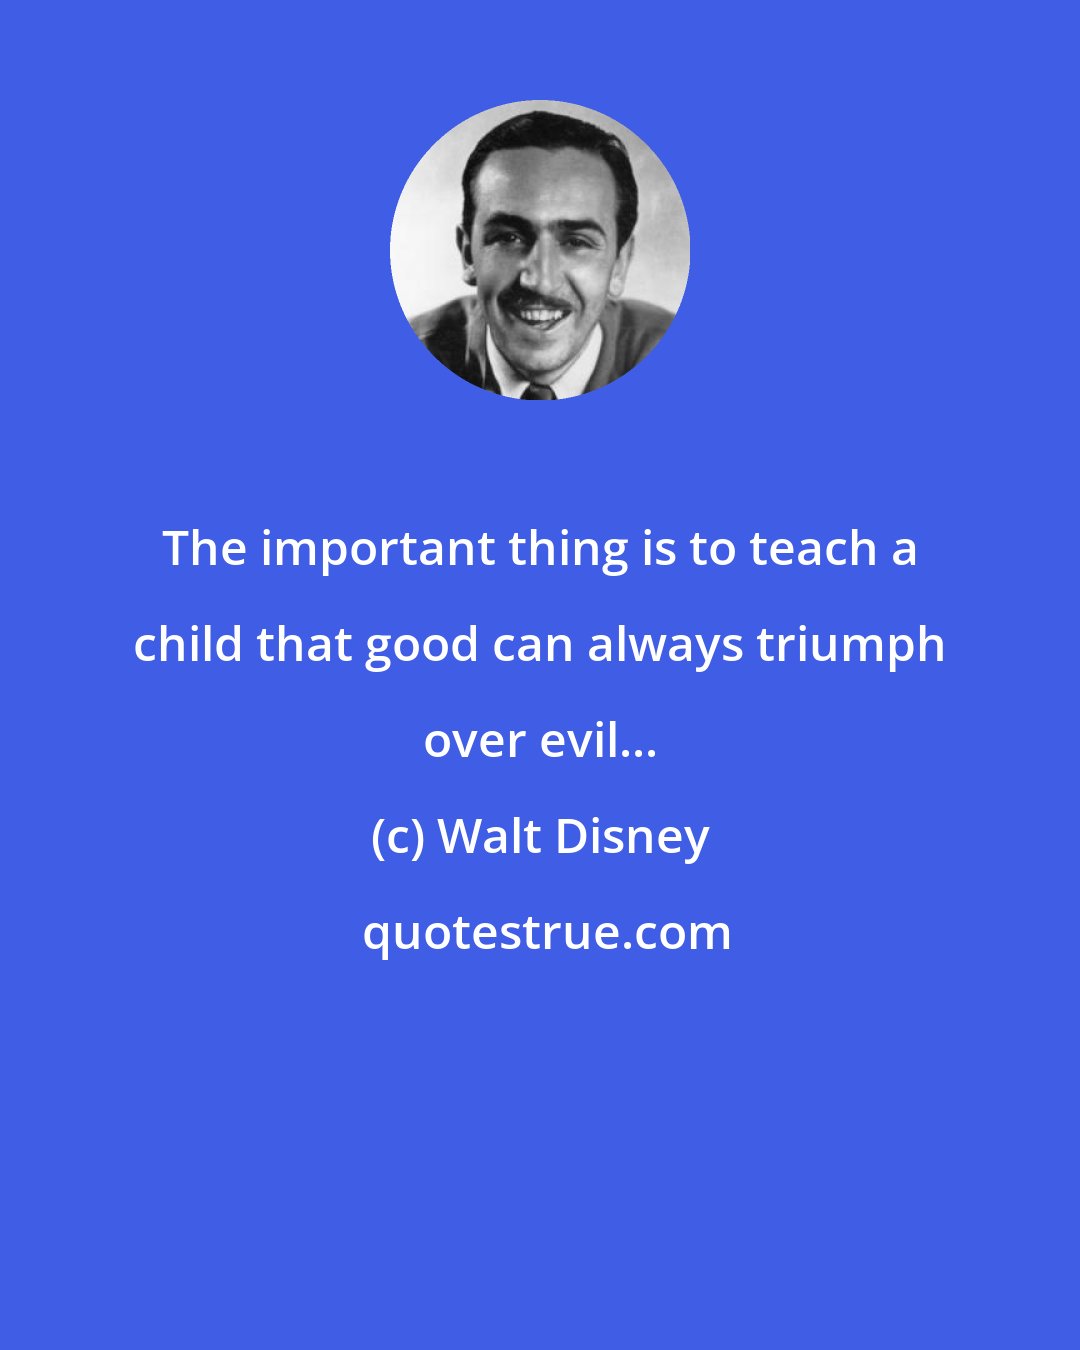 Walt Disney: The important thing is to teach a child that good can always triumph over evil...